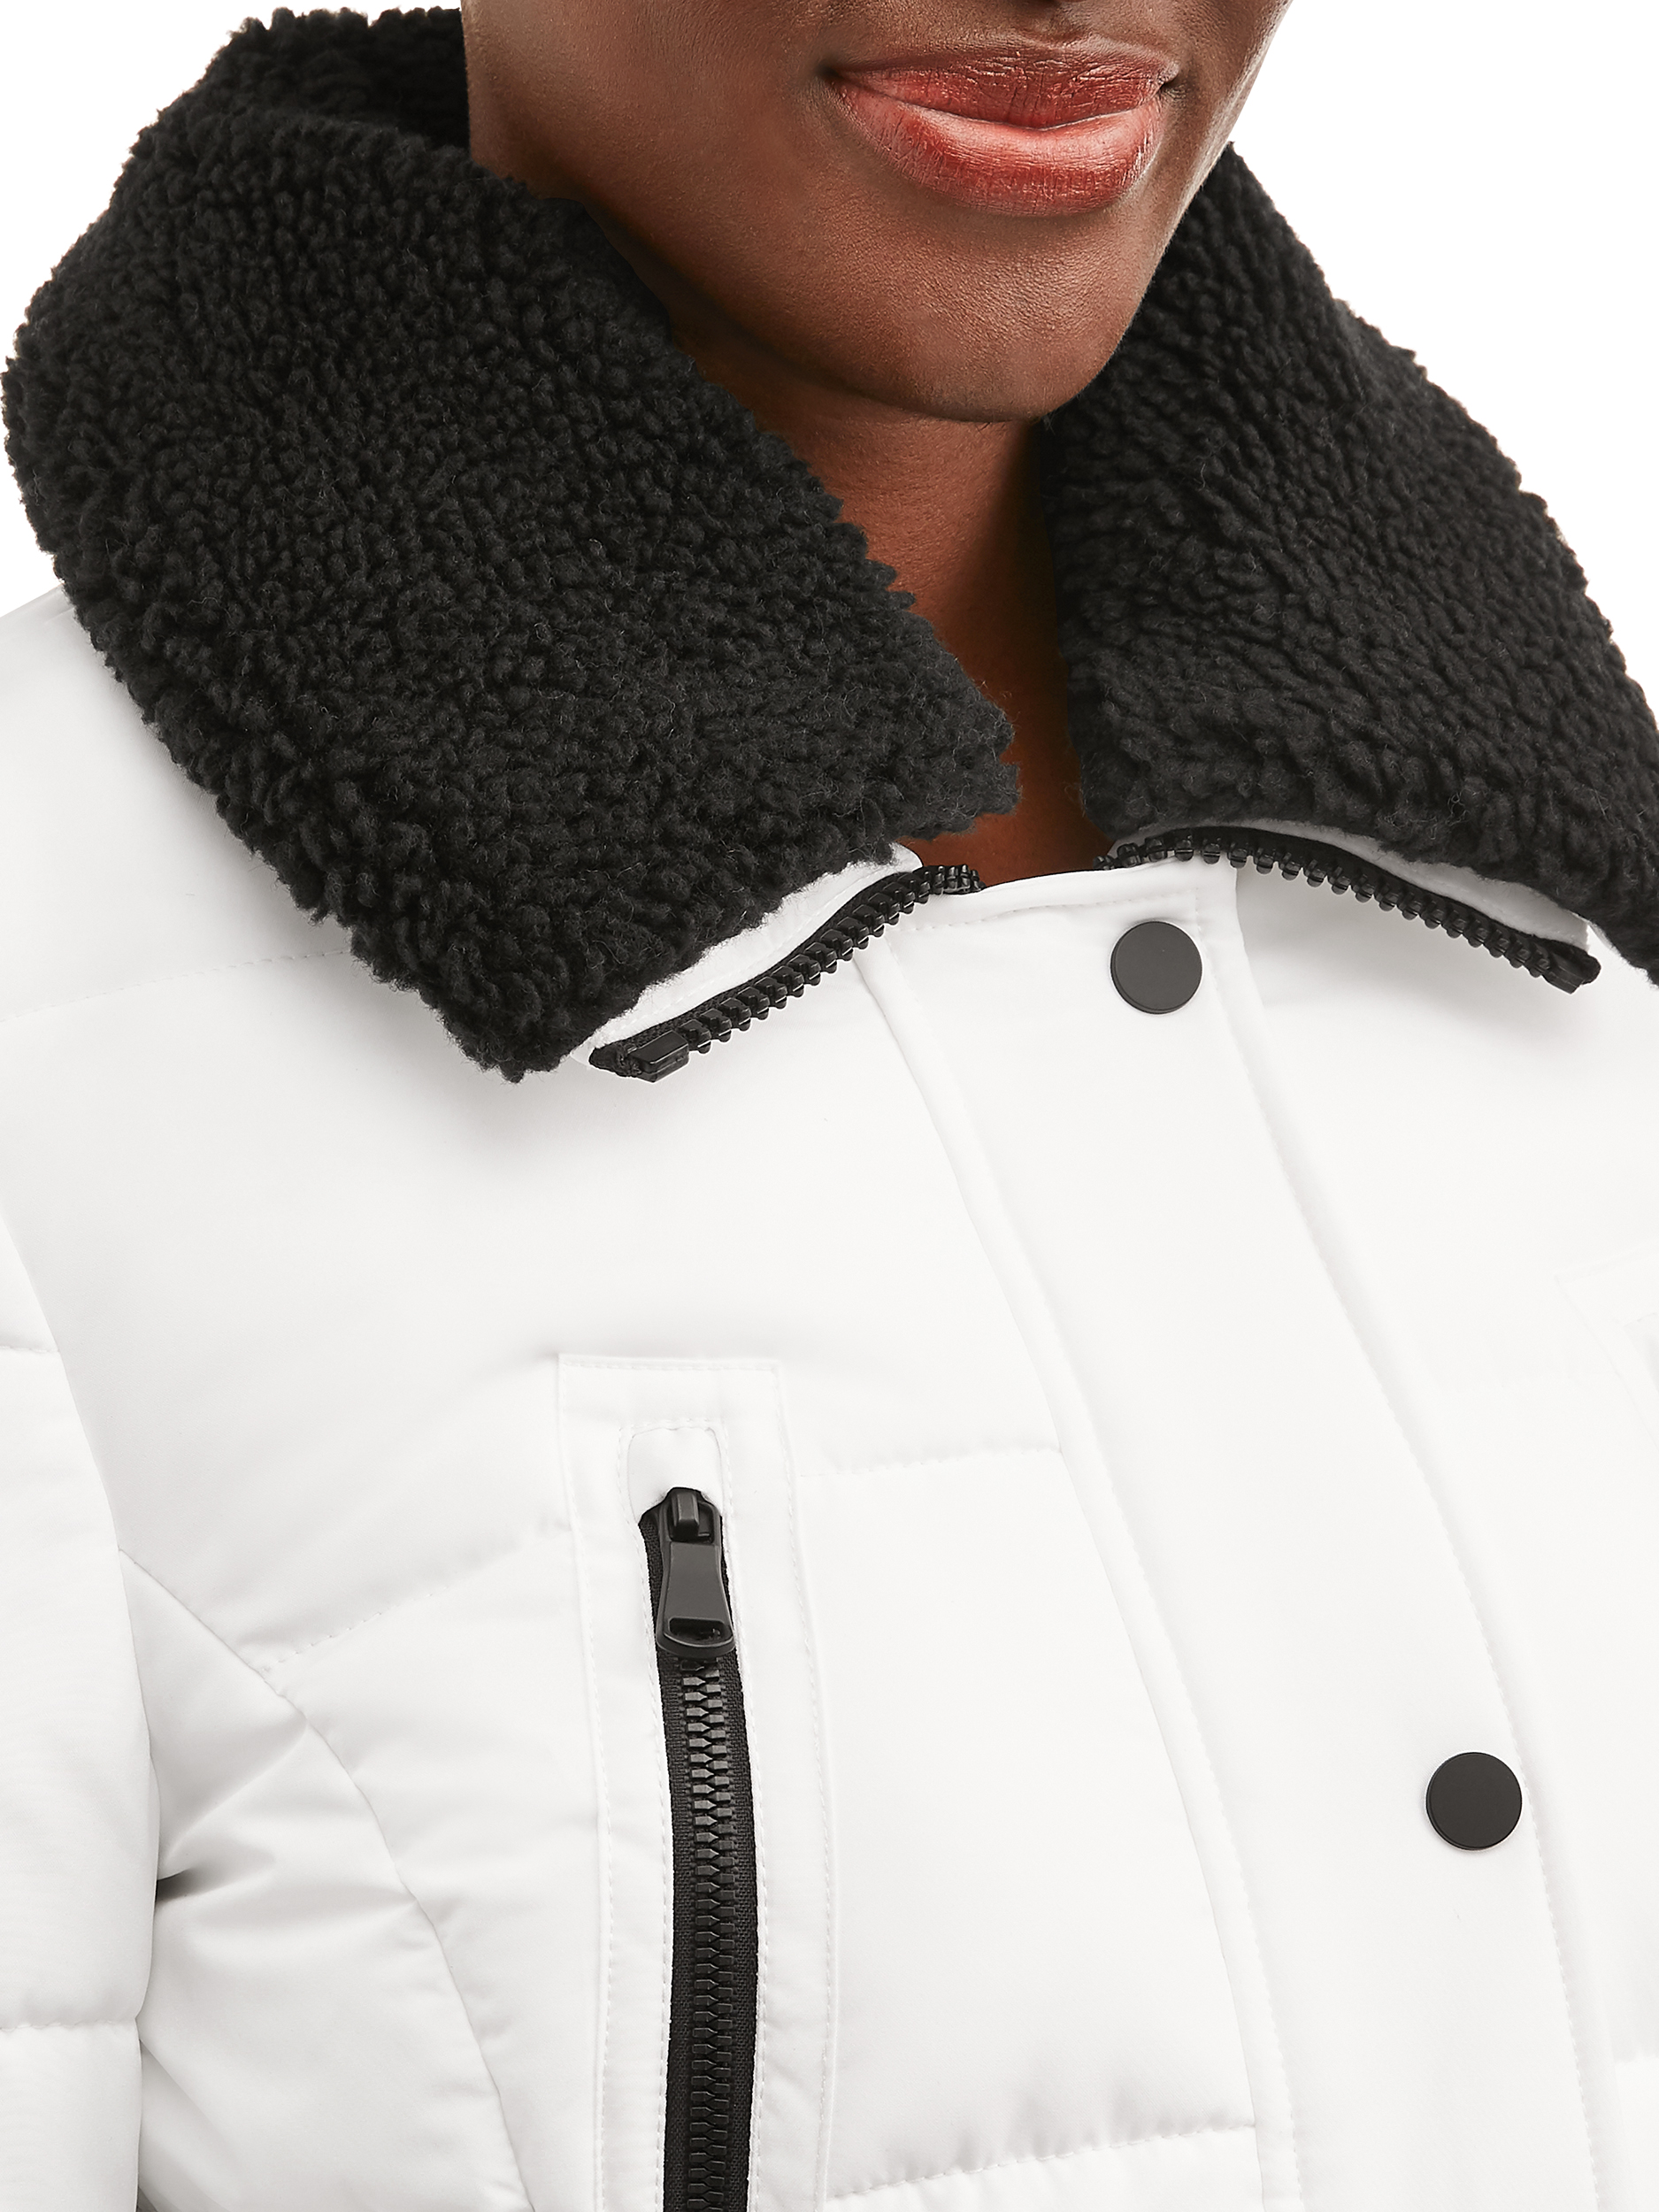 F.O.G. Women's Long Puffer with Snap Front Closure - image 4 of 4